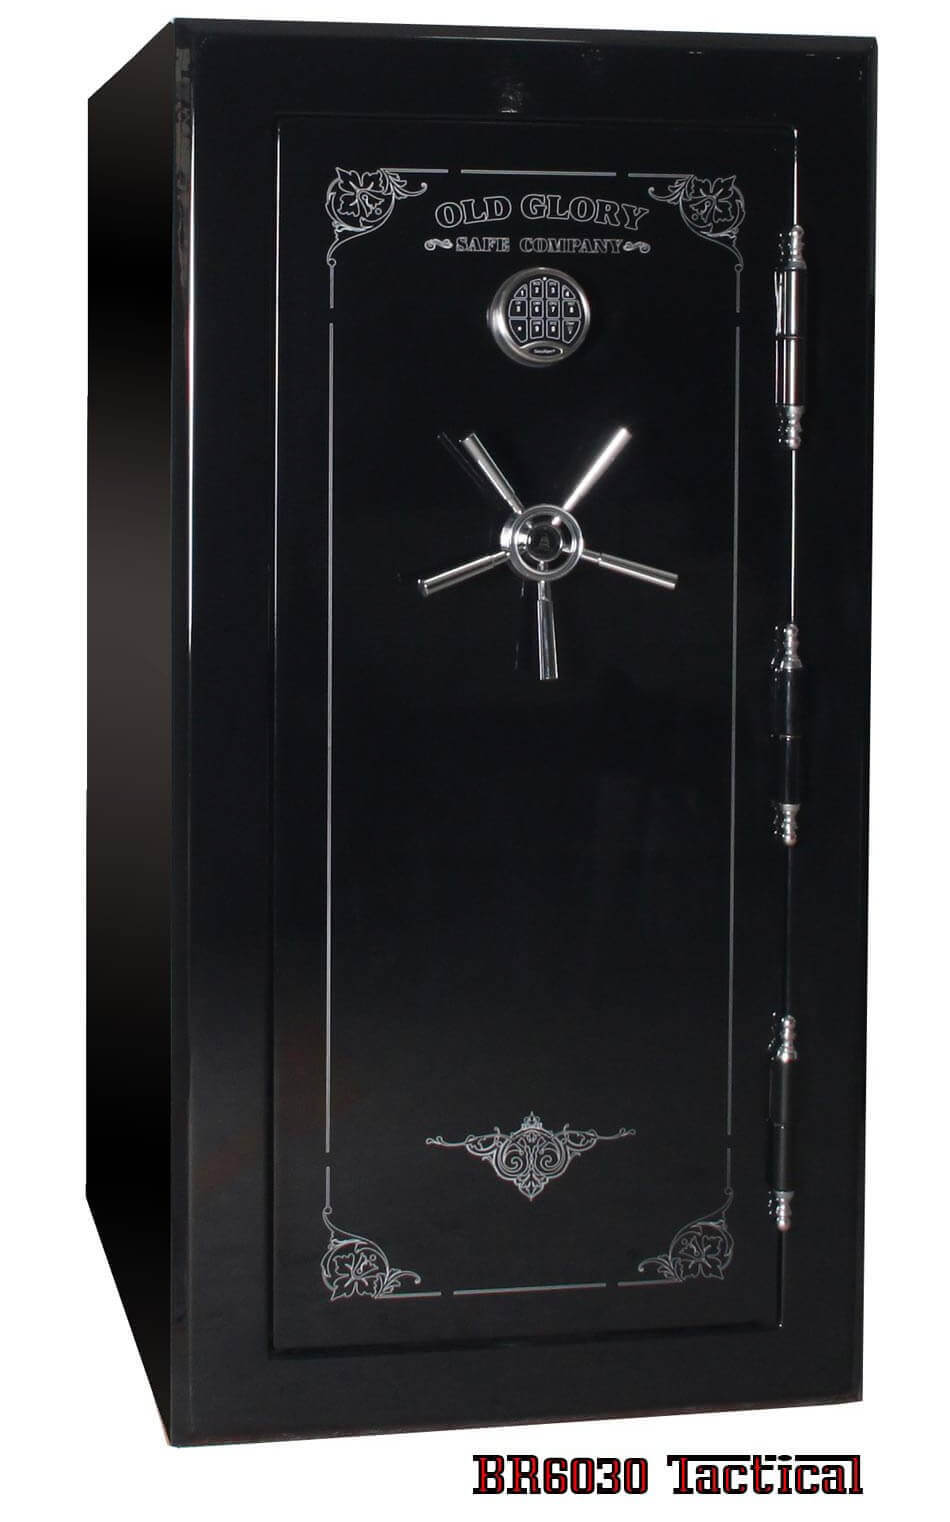 60 inch tall by 30 inch wide Old Glory Battle Ready tactical gun safe locked in gloss black